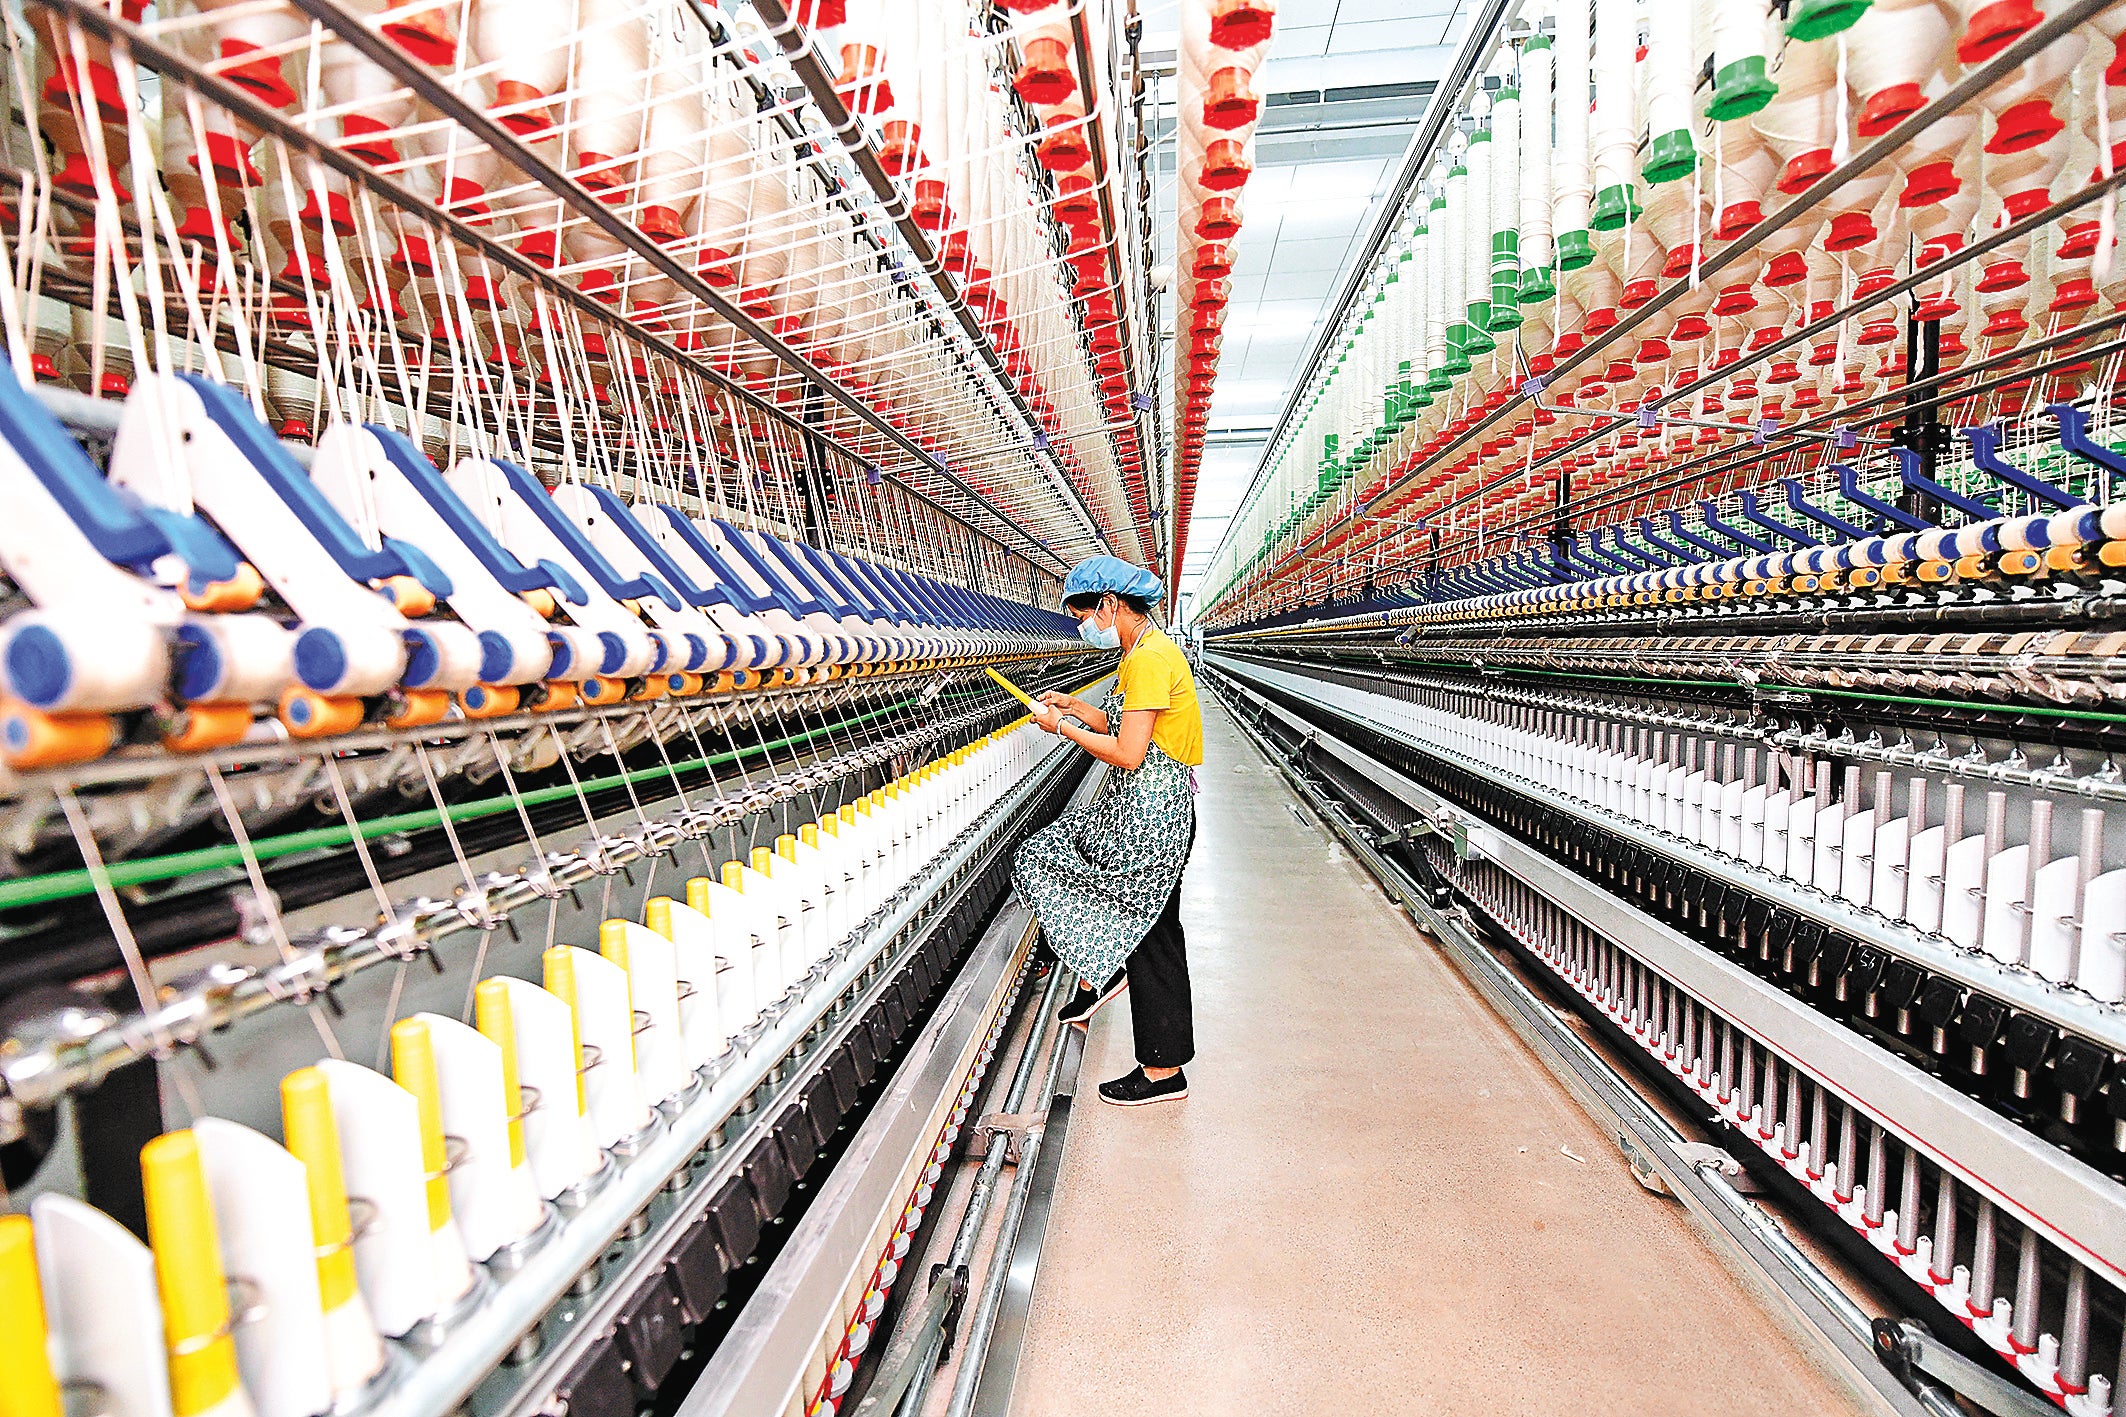 An employee works on a cotton yarn production line at an intelligent mechanised workshop of a textile company in Ganzhou, Jiangxi province, in May 2022